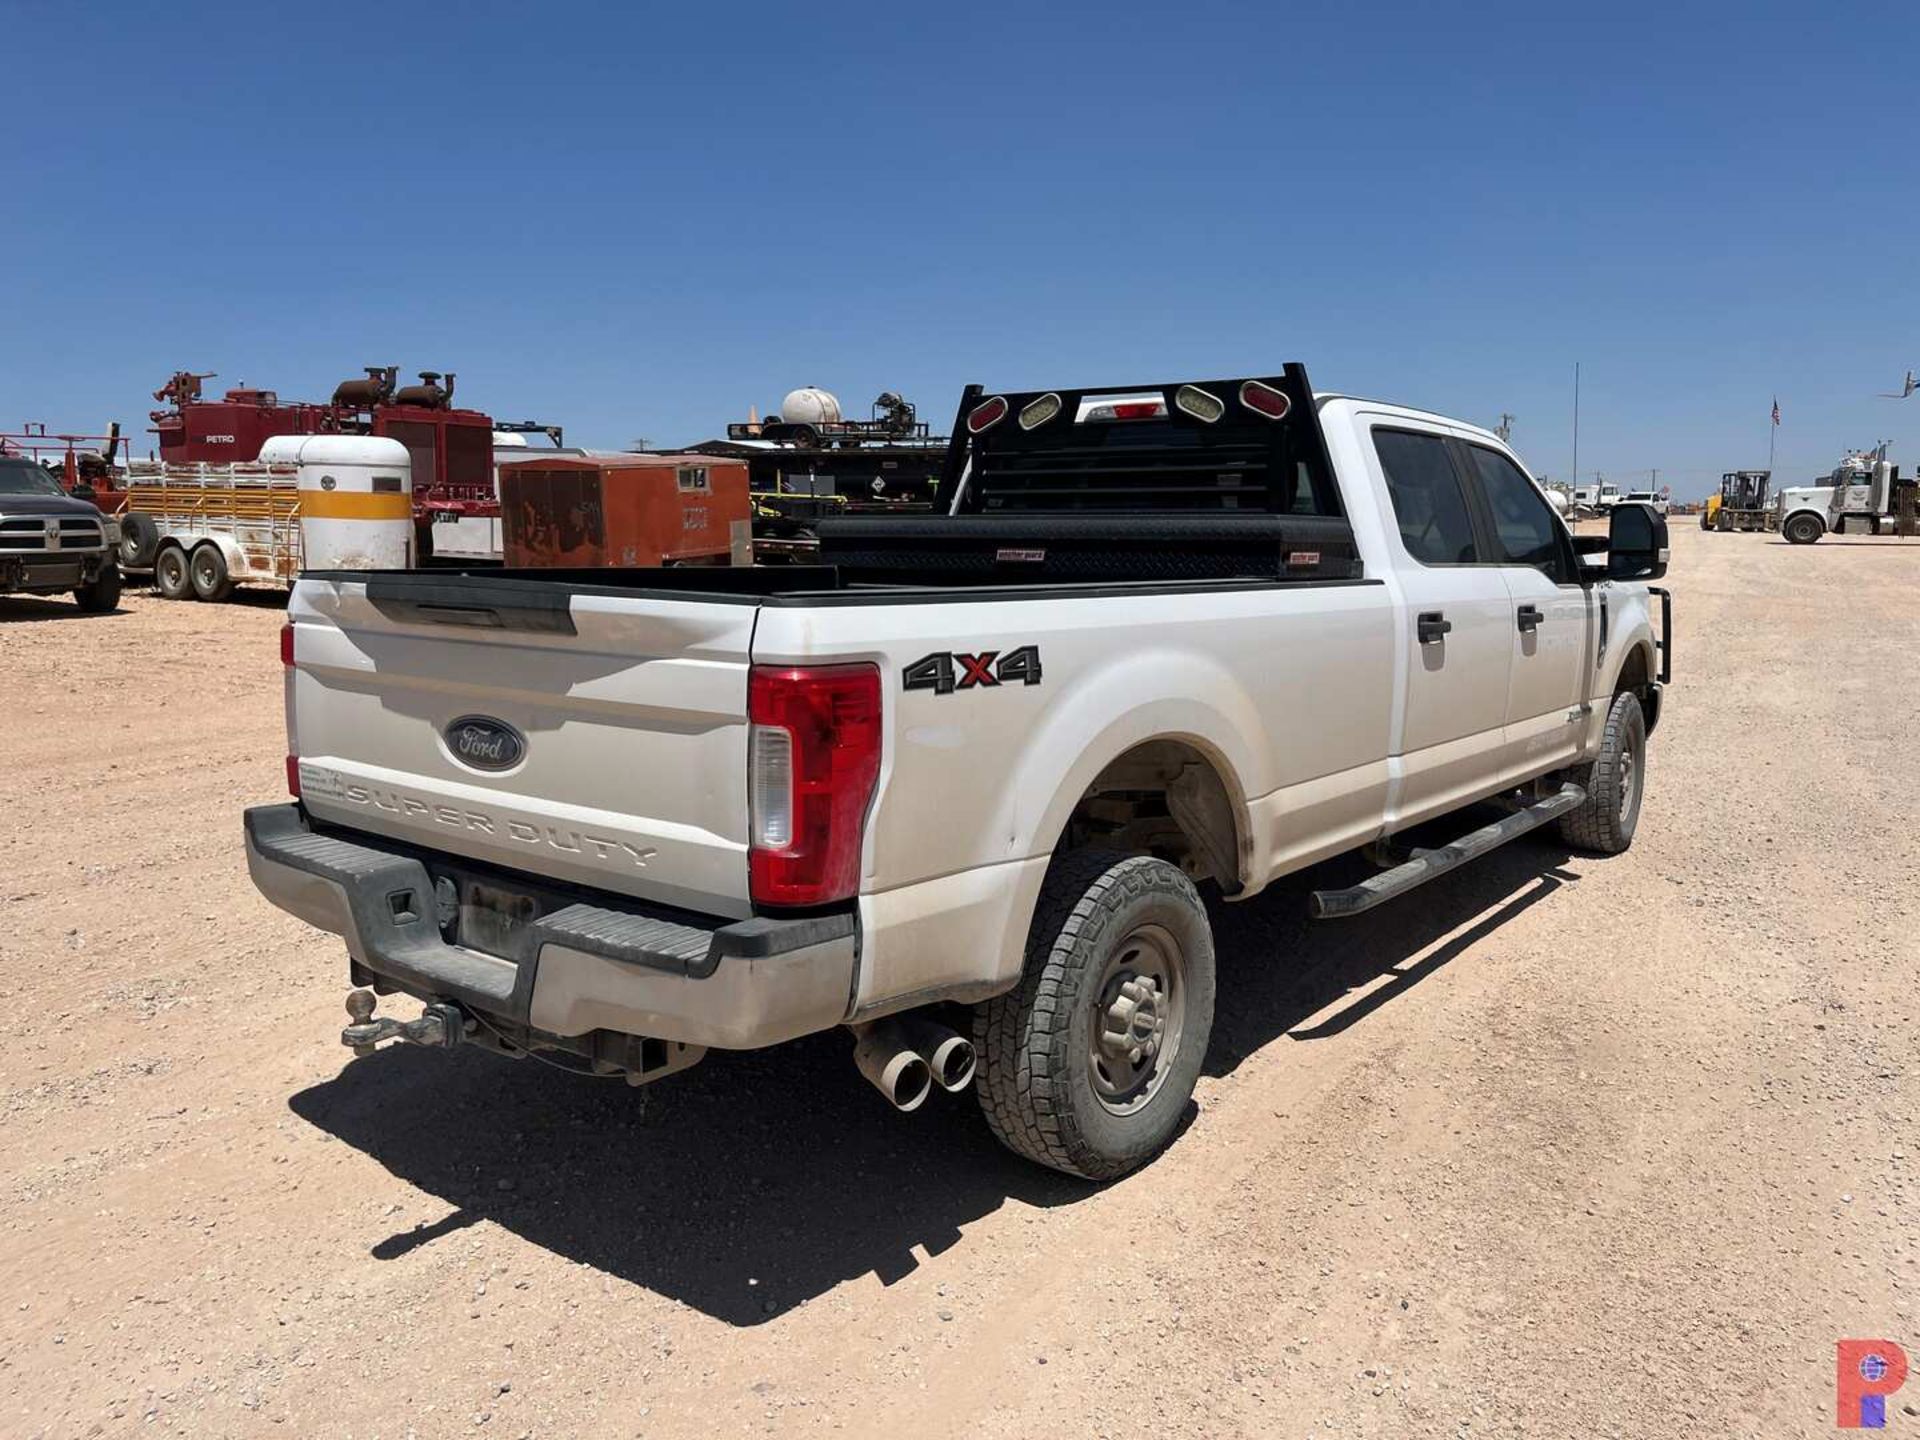 2017 FORD F-250 CREW CAB PICKUP TRUCK - Image 3 of 7